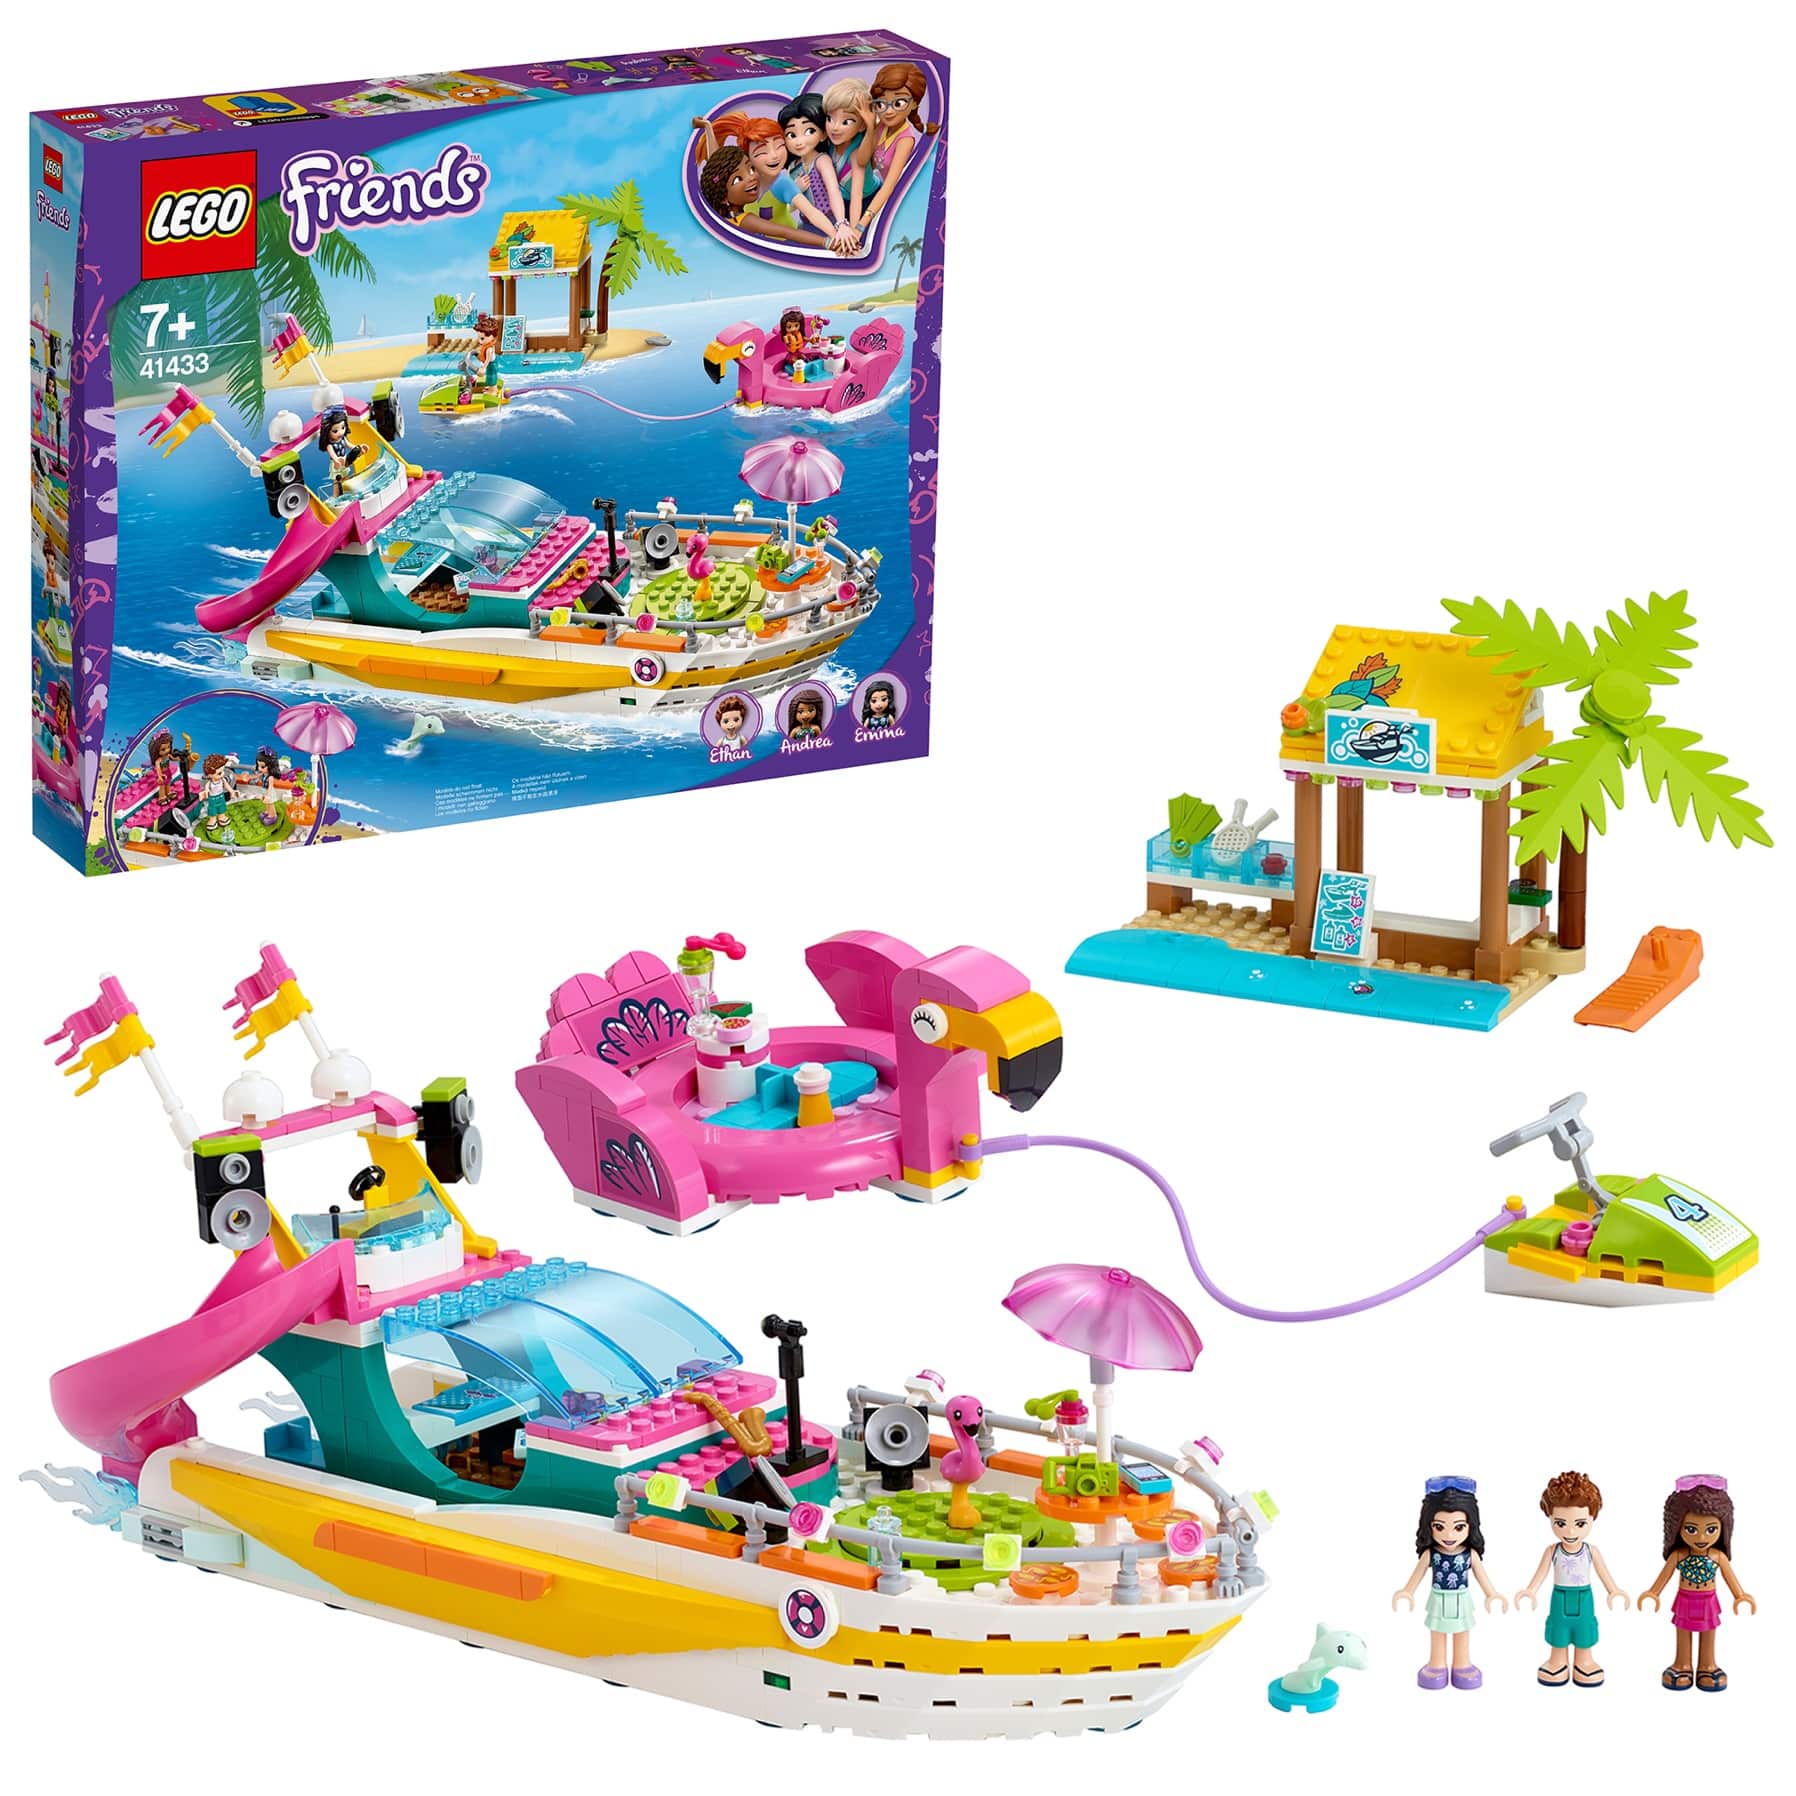 Buy LEGO Friends Party Boat \'R\' the UAE|Toys Us Pieces) & Online (640 Dubai in